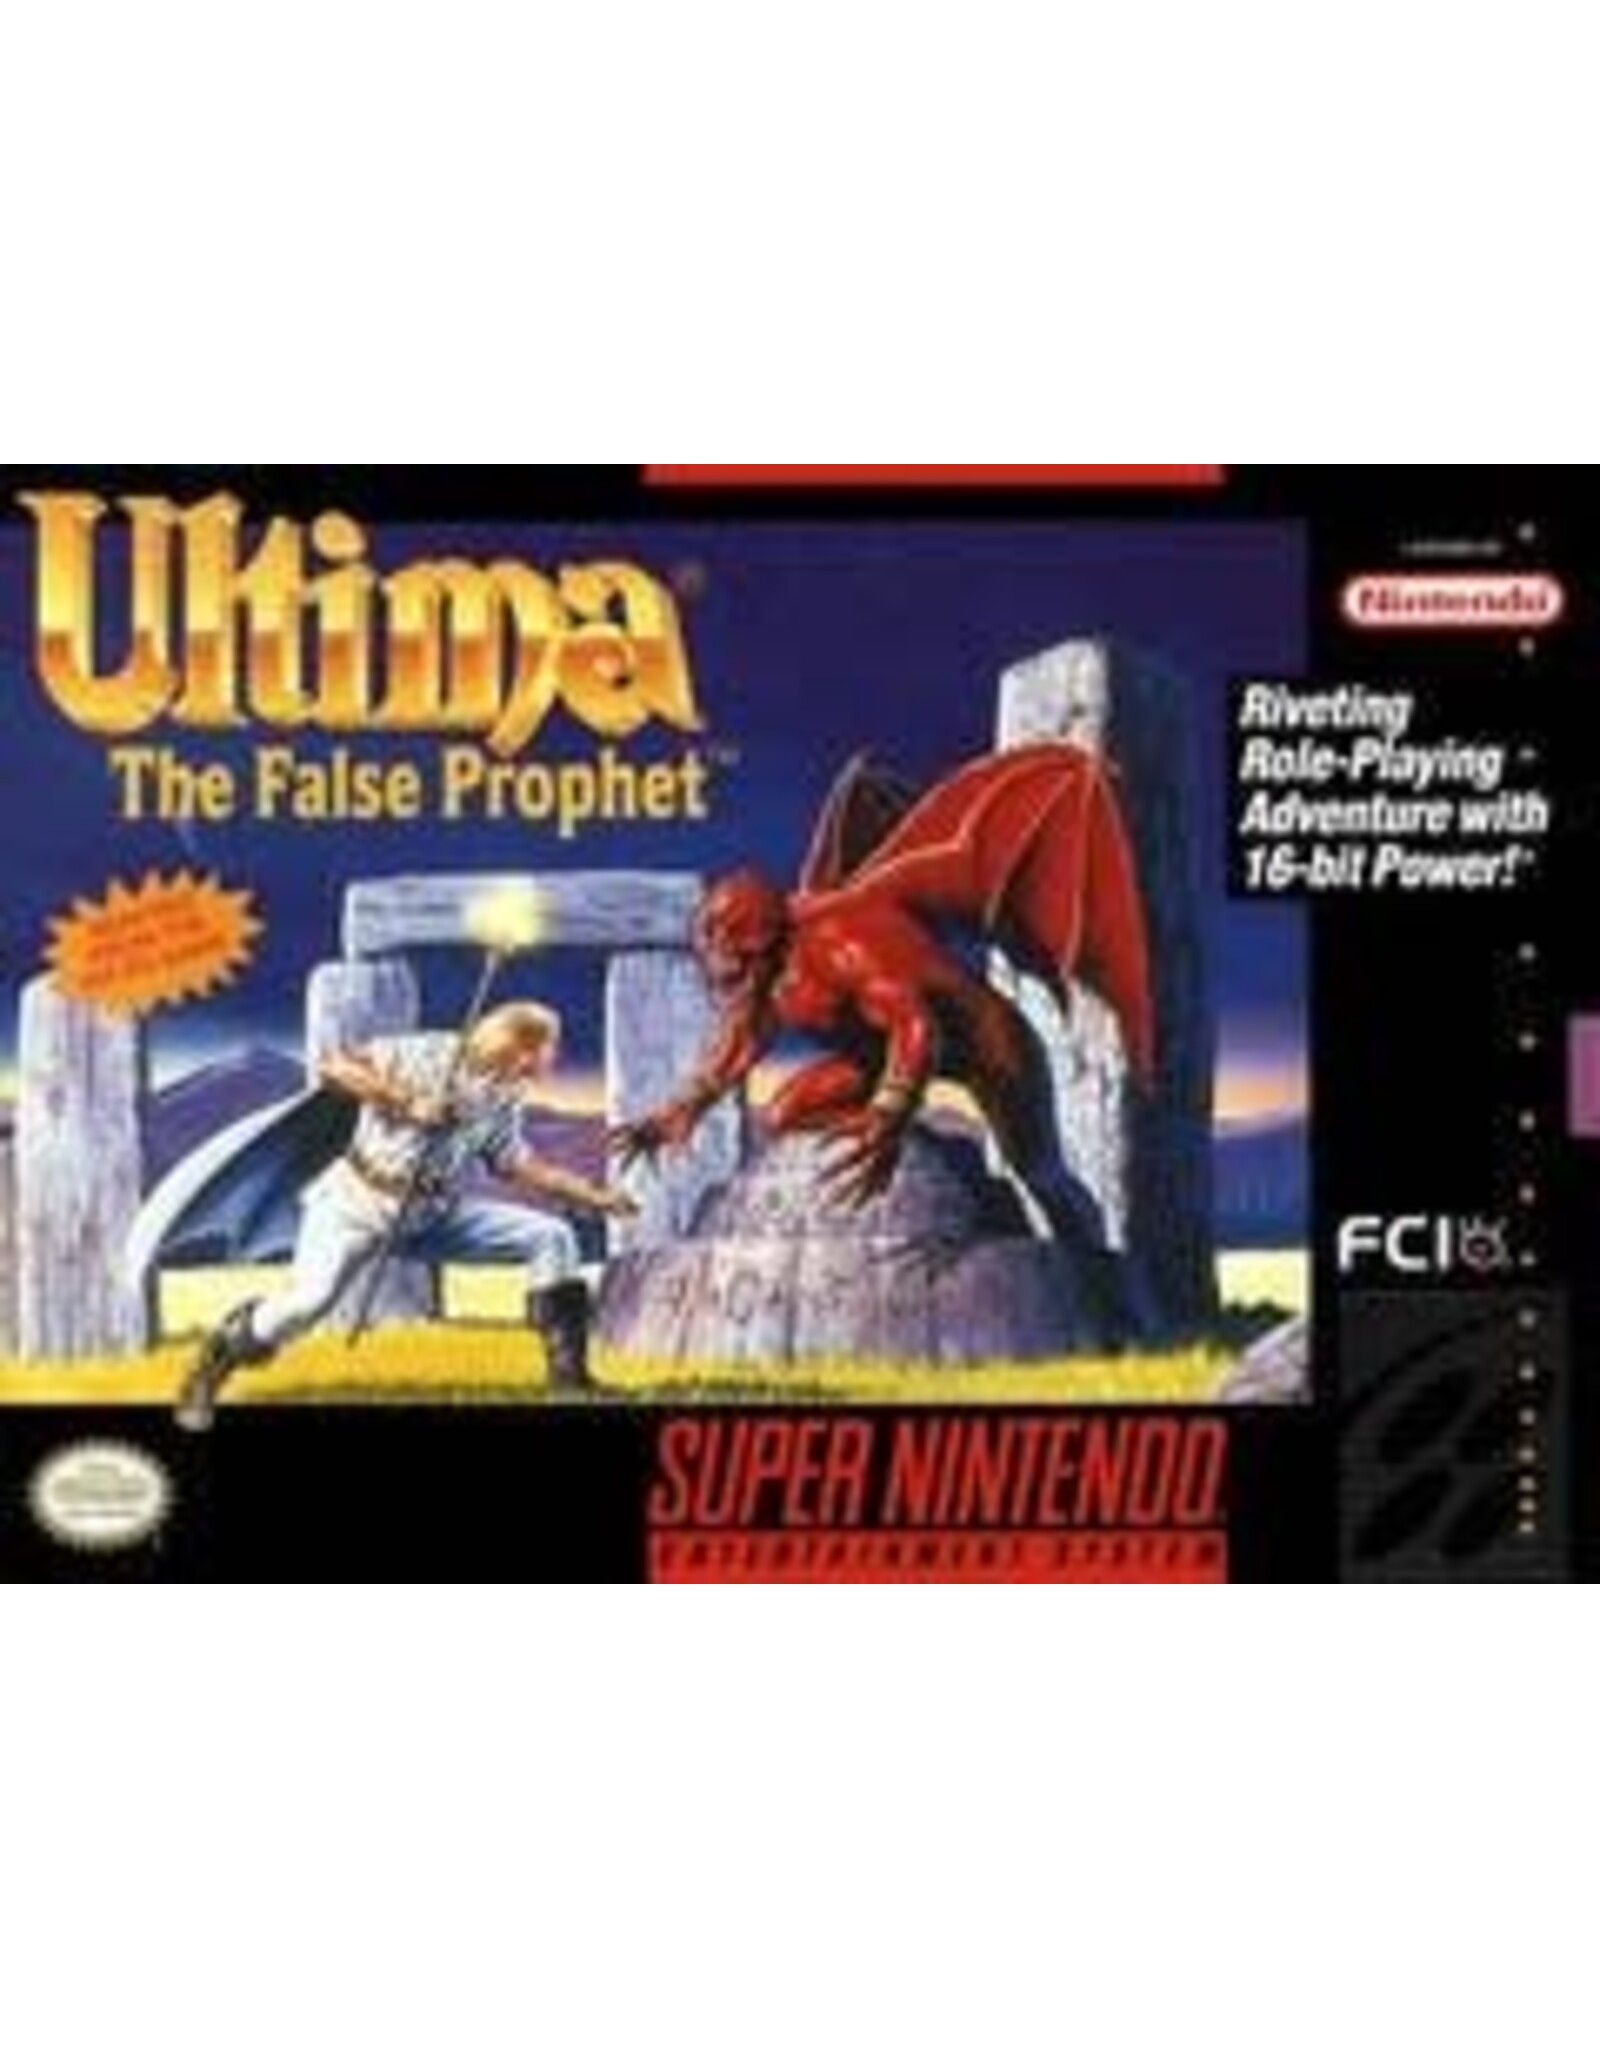 Super Nintendo Ultima The False Prophet (Used, Cart Only, Cosmetic Damage)